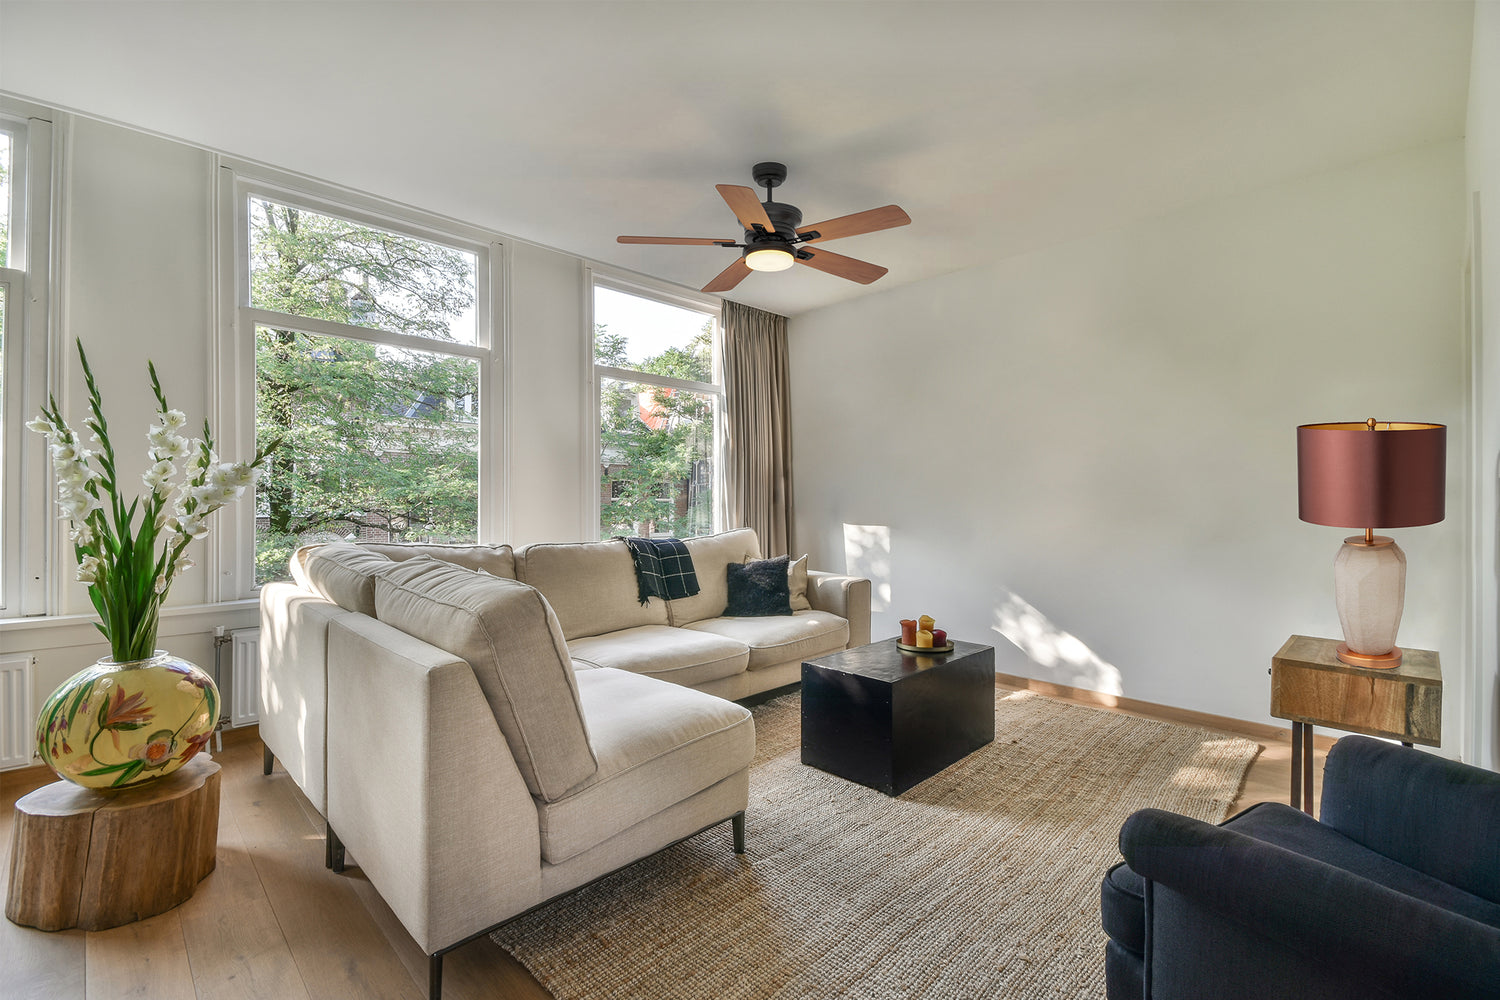 How to Choose a Ceiling Fan Size and Design